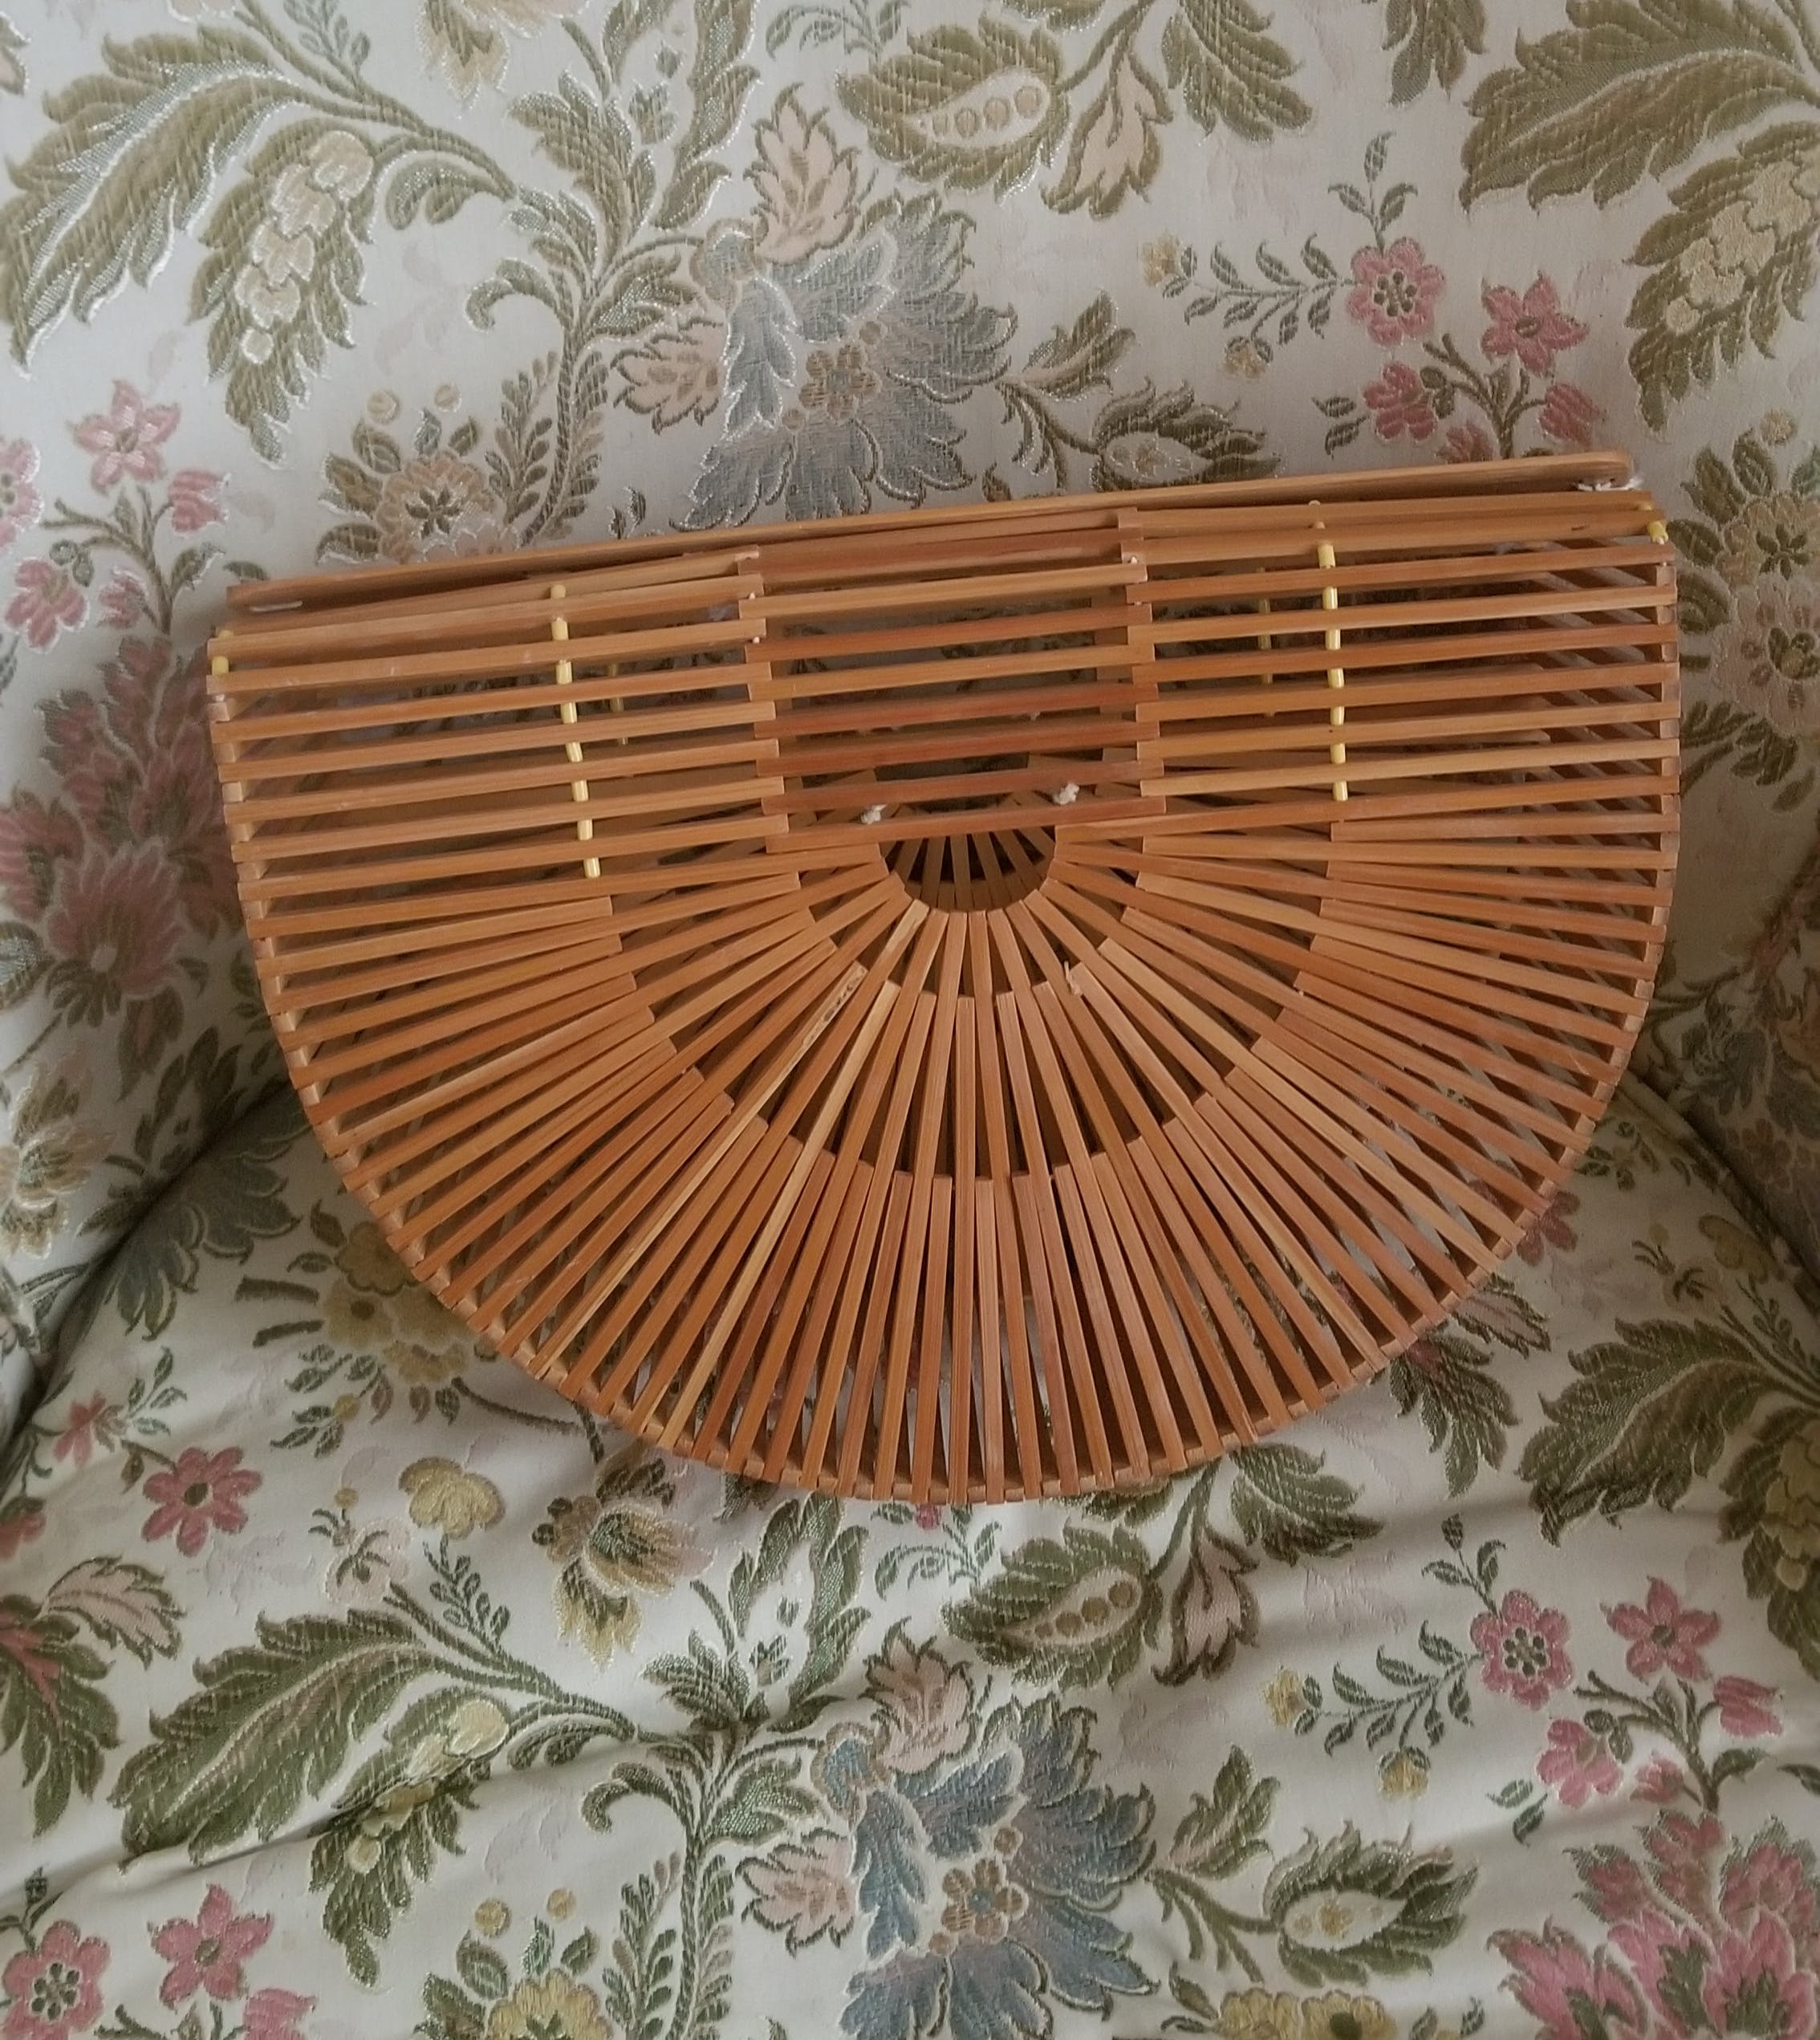 Vintage 50's Bamboo Half Moon Bag by Handmade In Japan | Shop THRILLING